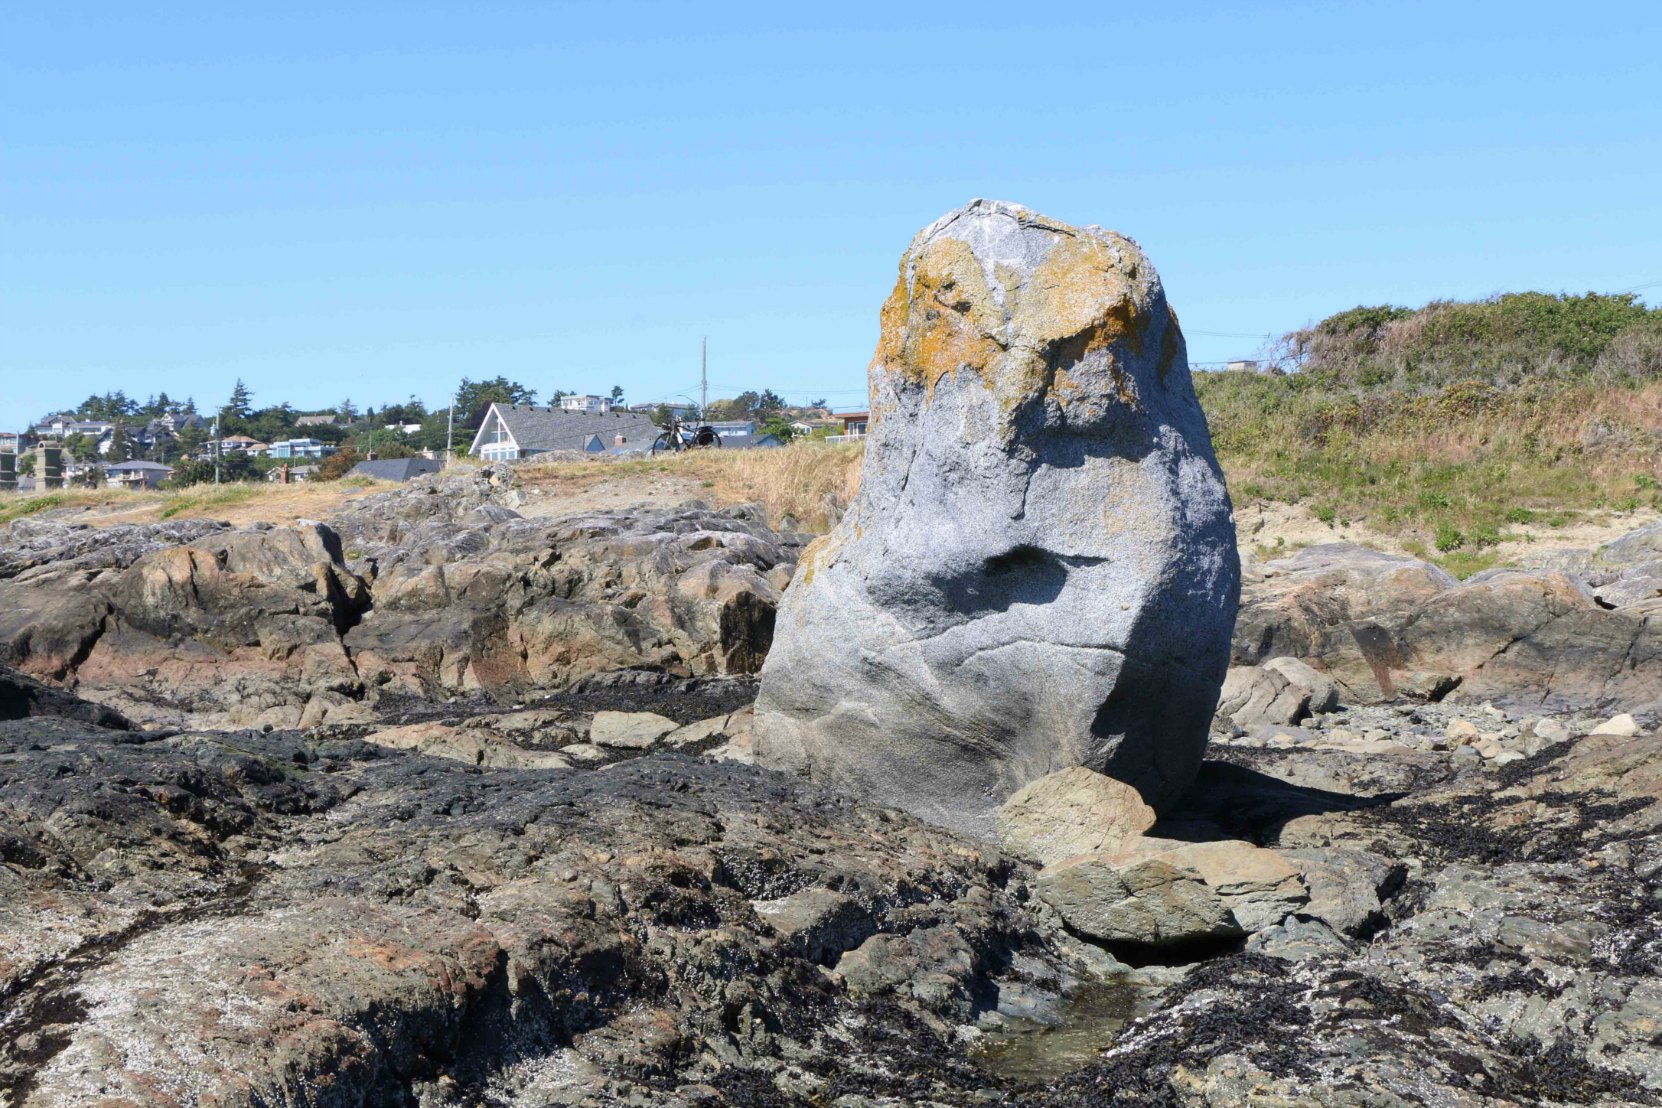 One of two large rocks which were deposited at Harling Point by glaciers as the ice receded at the end of the last Ice Age, 12,000 years ago. A Coast Salish legend says this rock was once a seal hunter who insulted the god Qals, who responded by turning the hunter to stone.